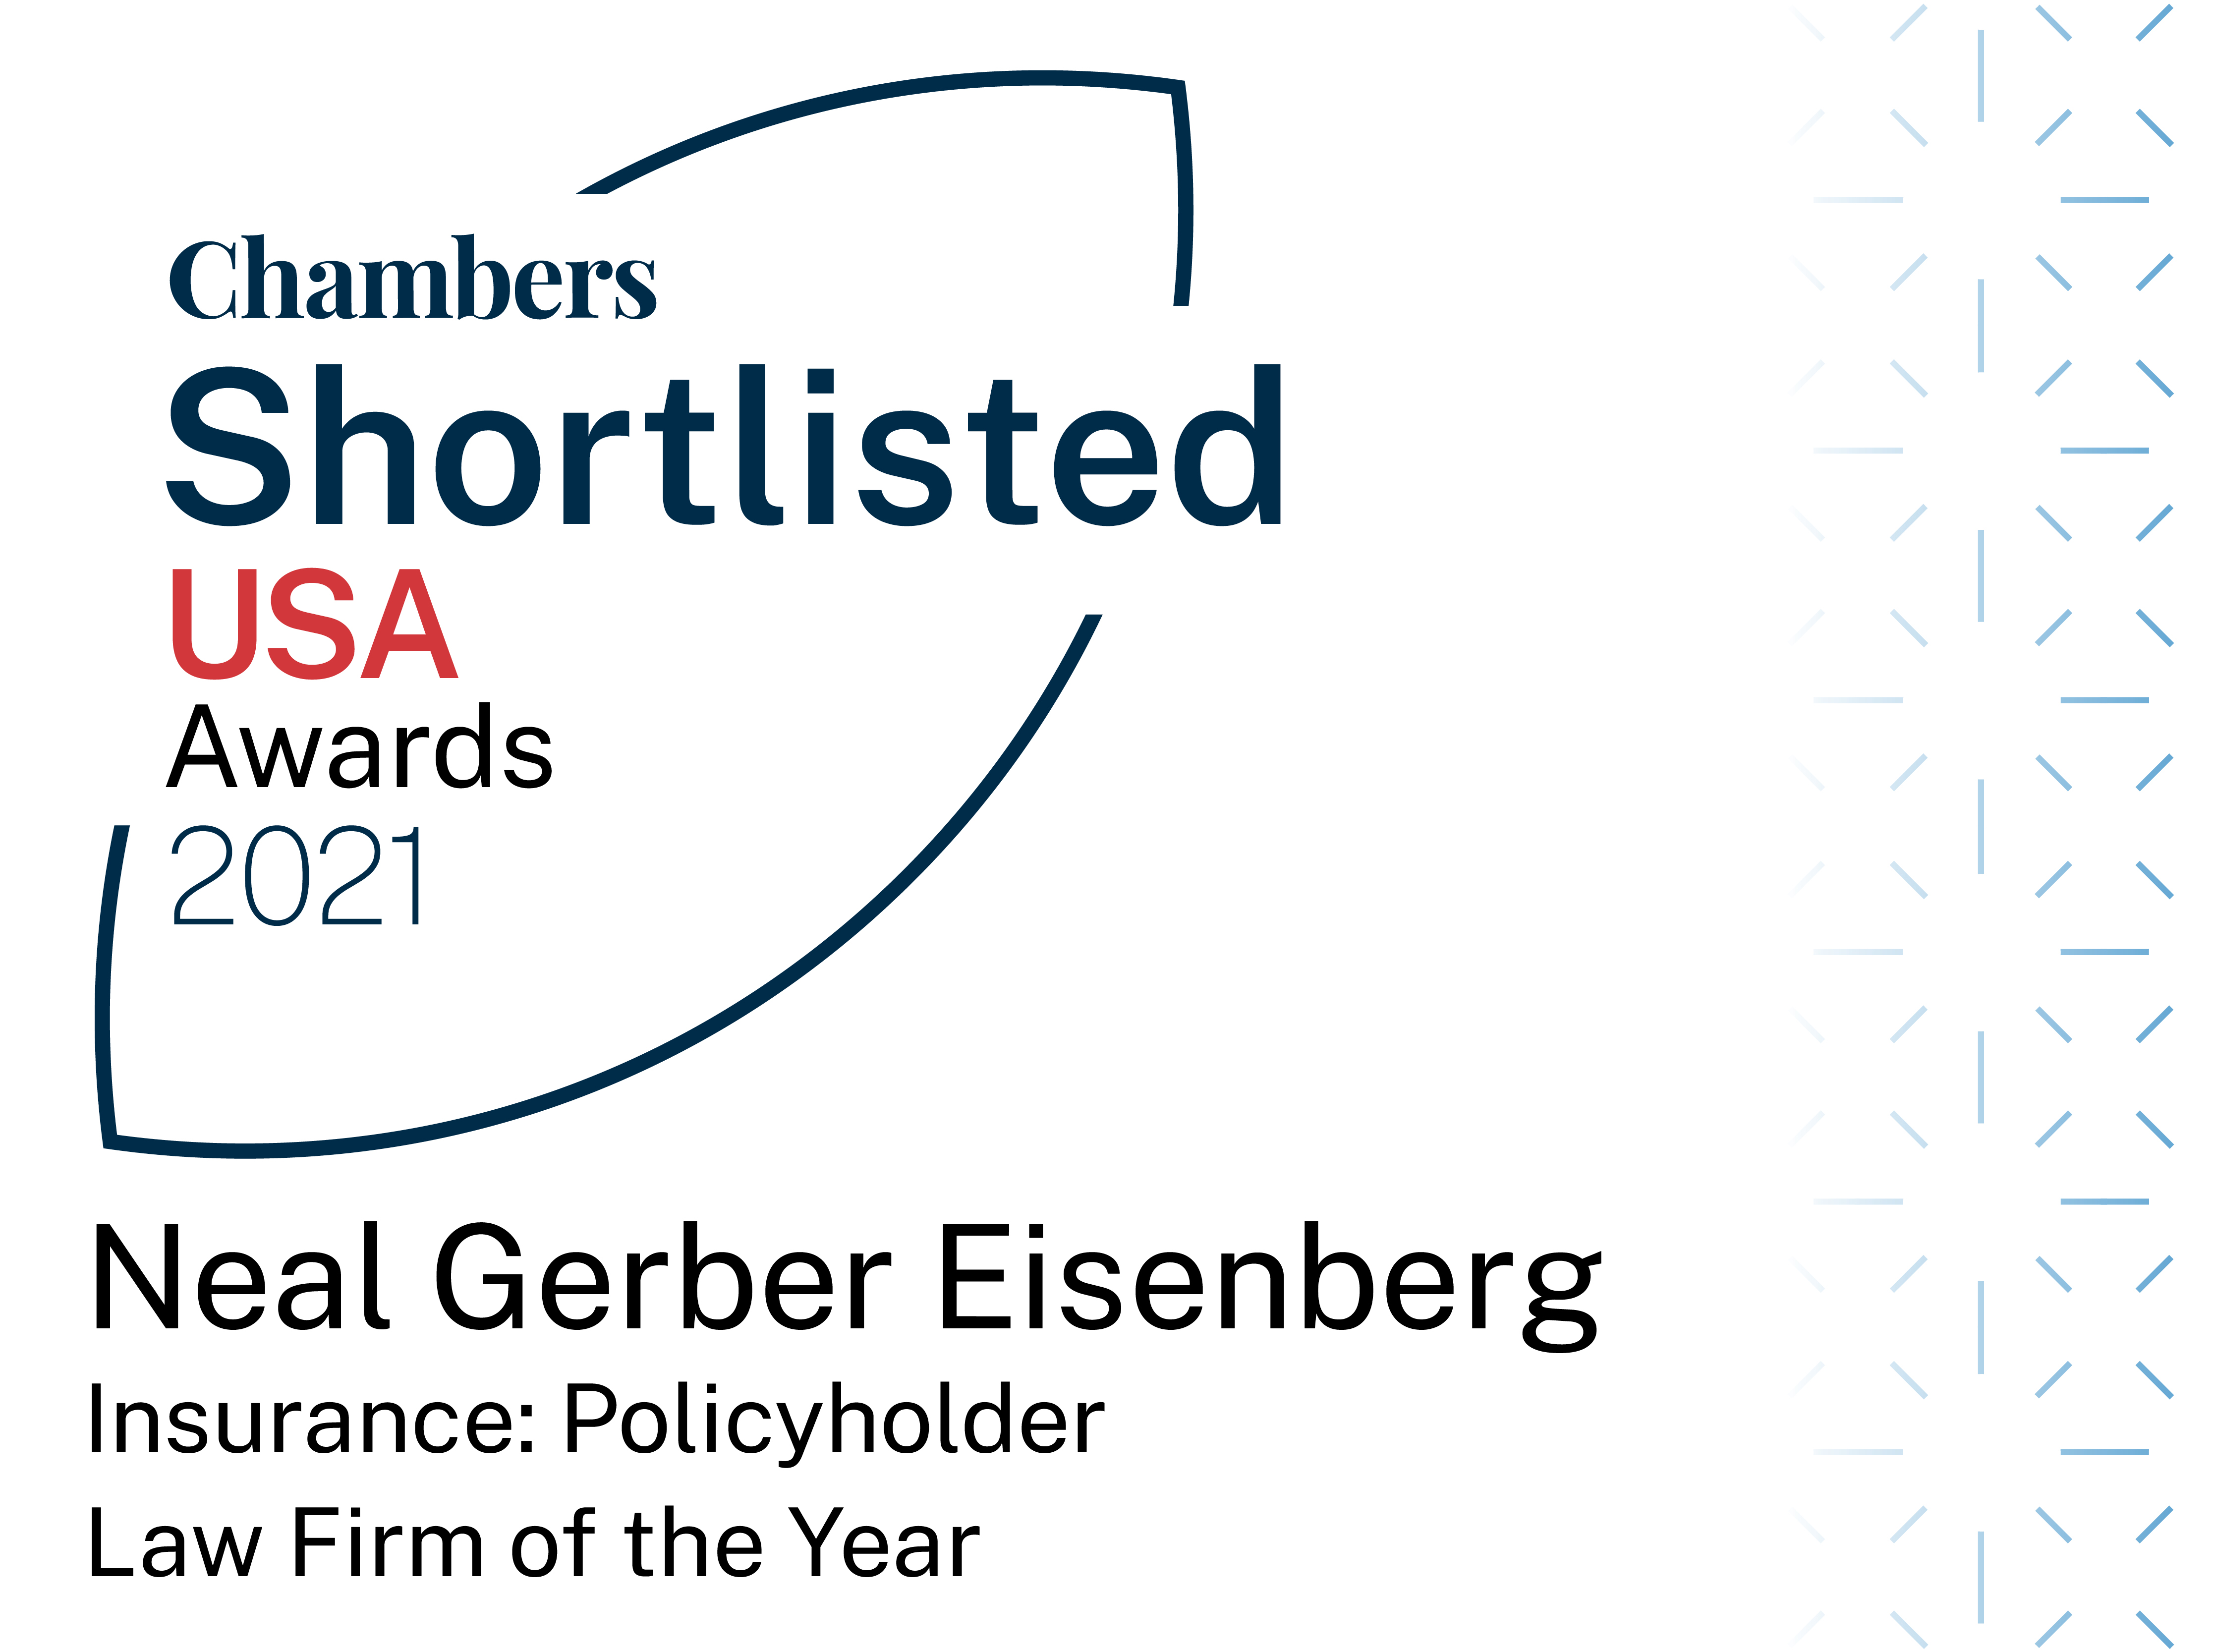 Nge Insurance Policyholder Group Shortlisted For Chambers Usa Law Firm Of The Year Award Neal Gerber Eisenberg Website